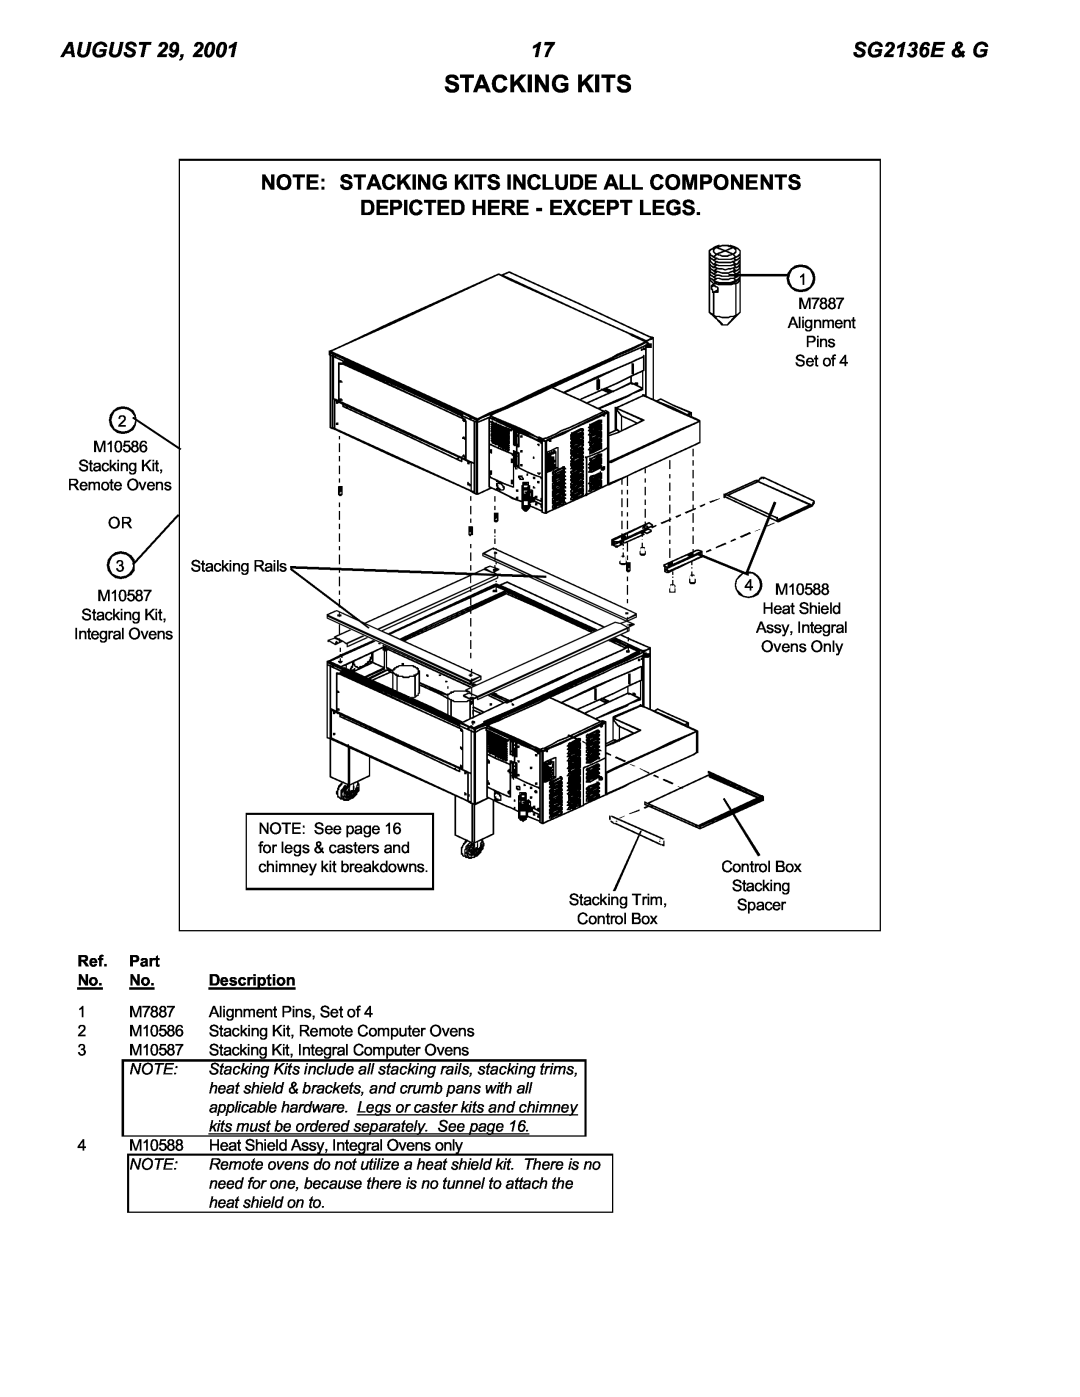 Blodgett SG2136 E & G manual Note Stacking Kits Include All Components Depicted Here - Except Legs 